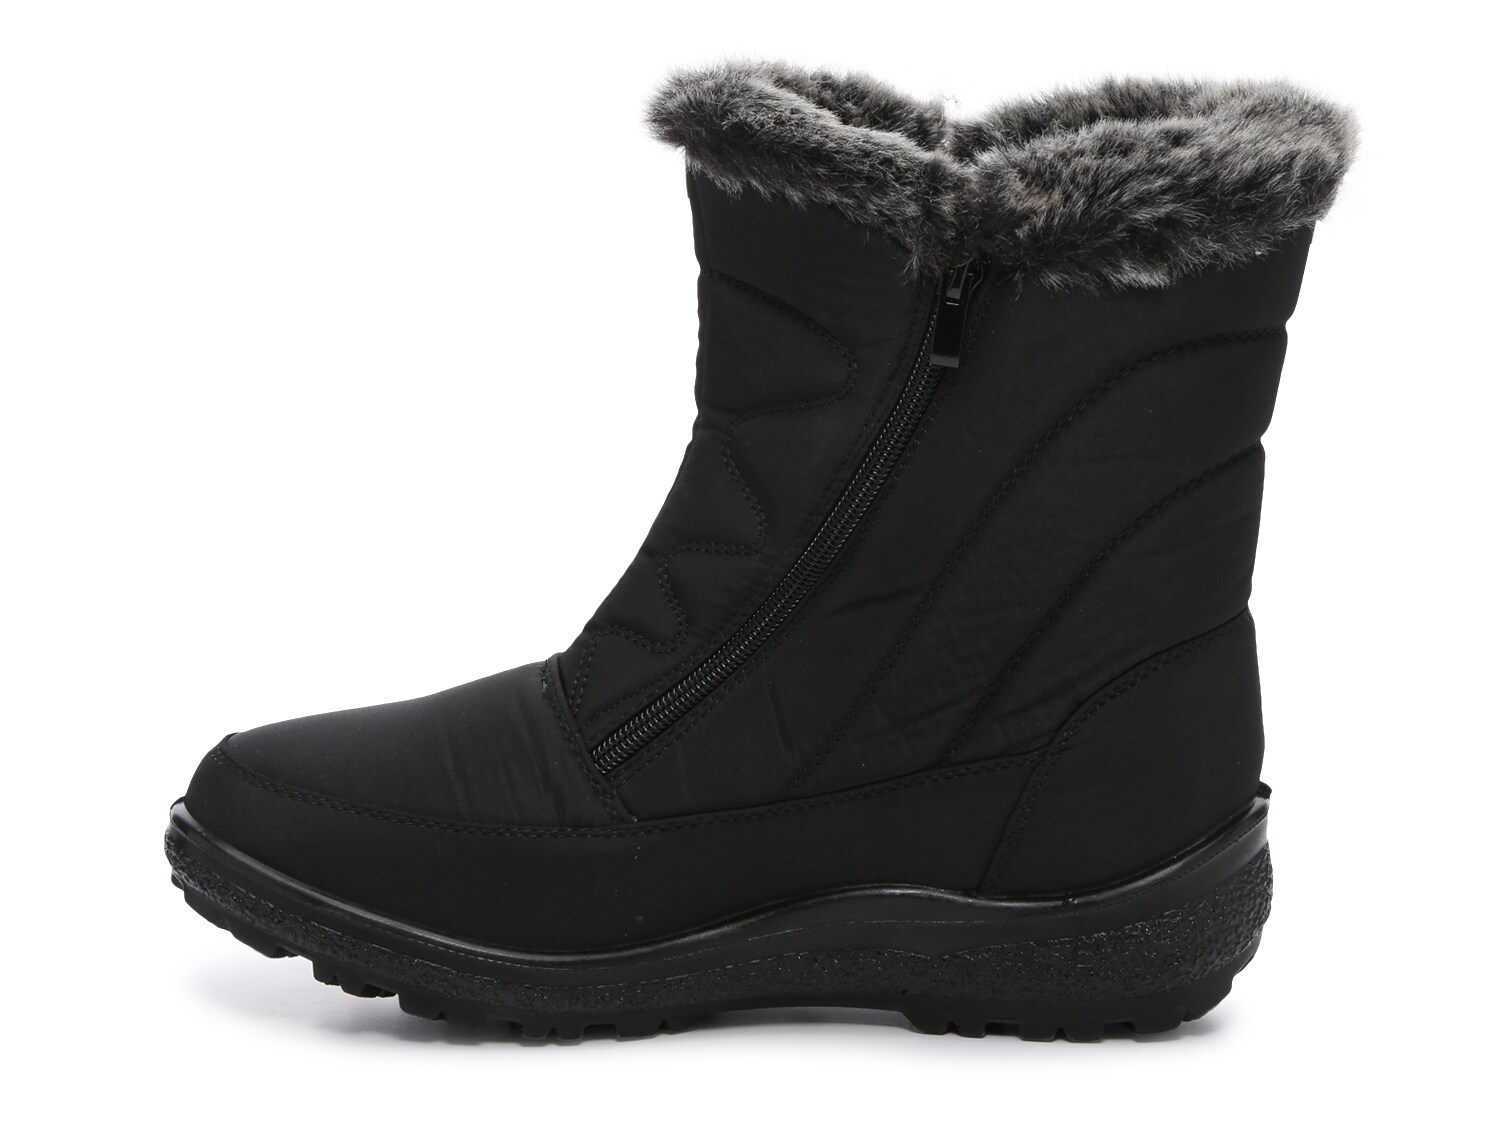 Flexus by Spring Step Persenia Snow Boot Women's Shoes | DSW